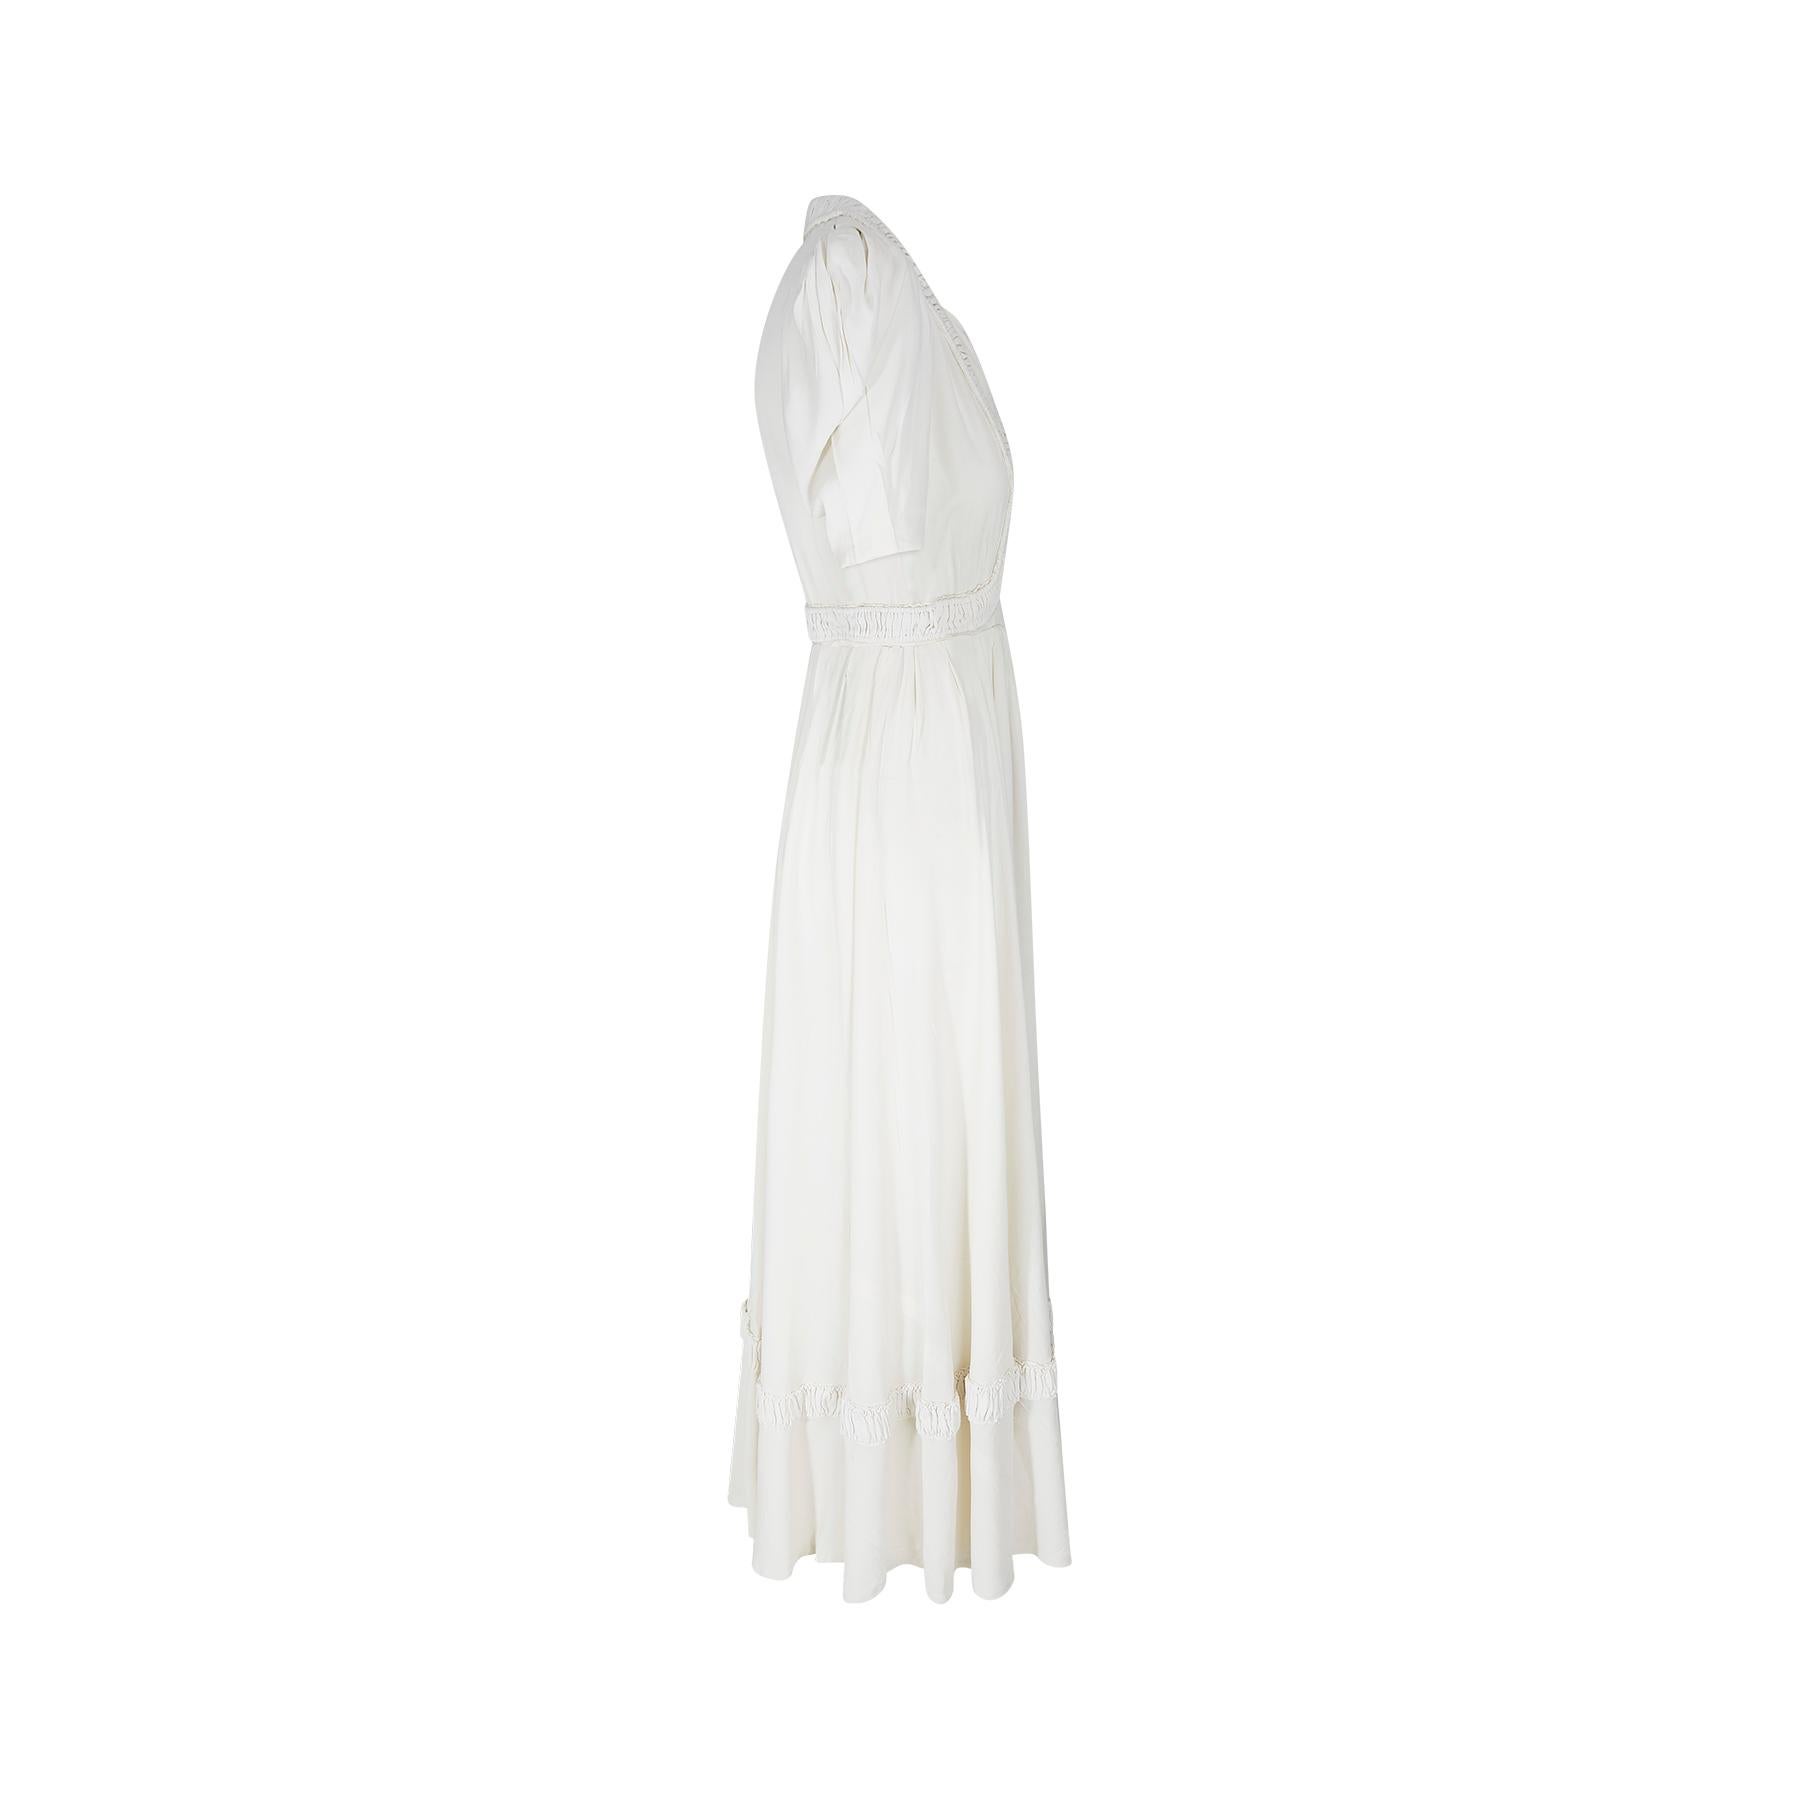 Gray Late 1930s Early 1940s White Crepe Wedding Dress For Sale